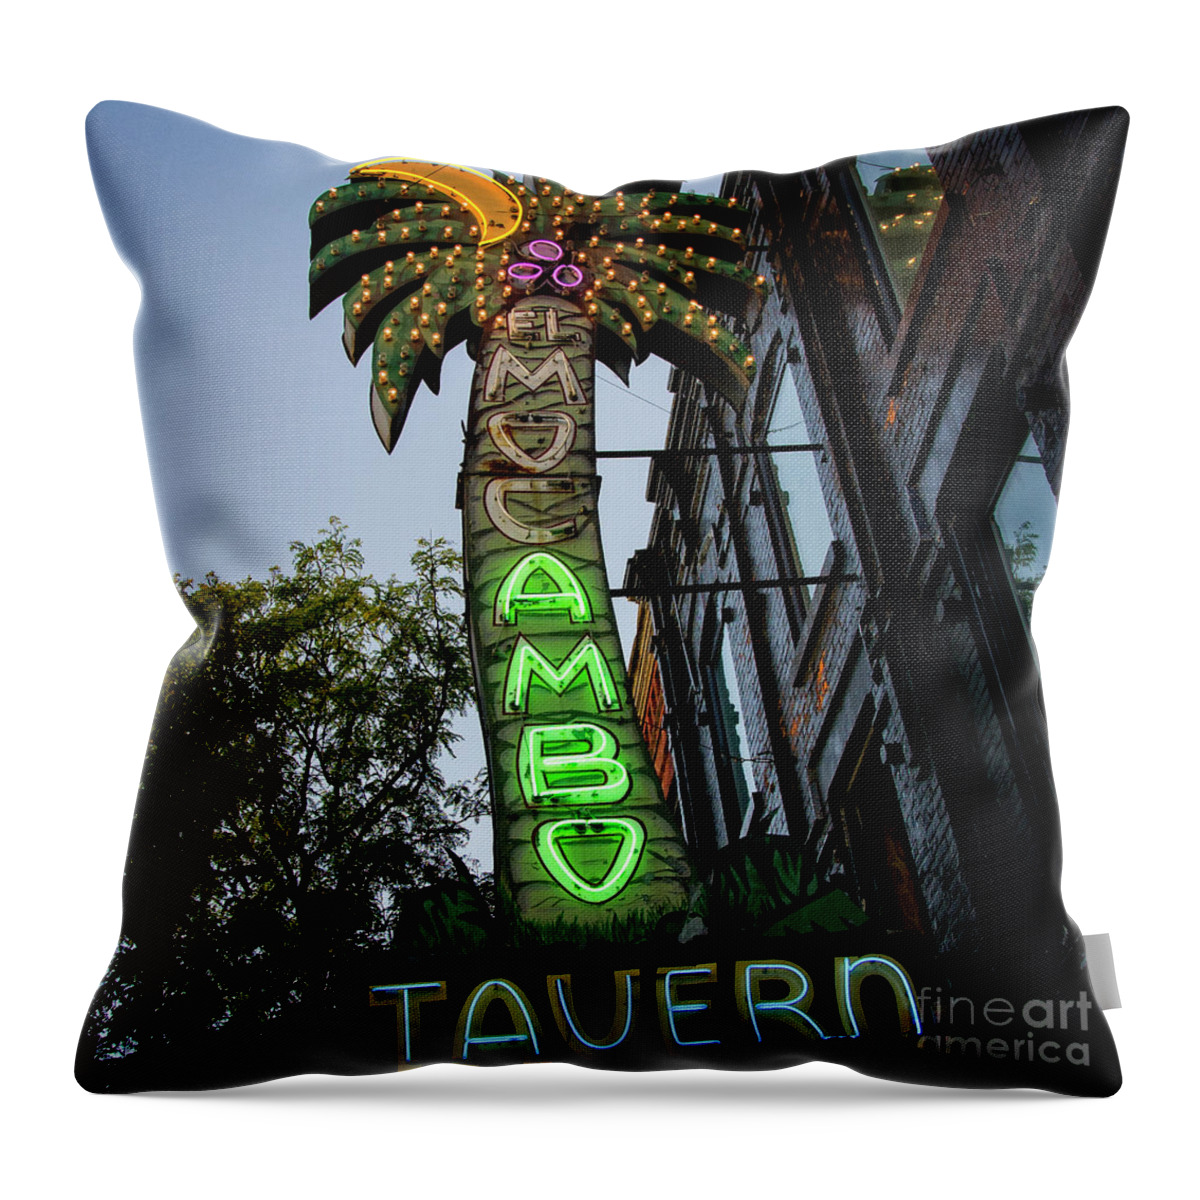 Toronto Throw Pillow featuring the photograph The Elmo by Lenore Locken